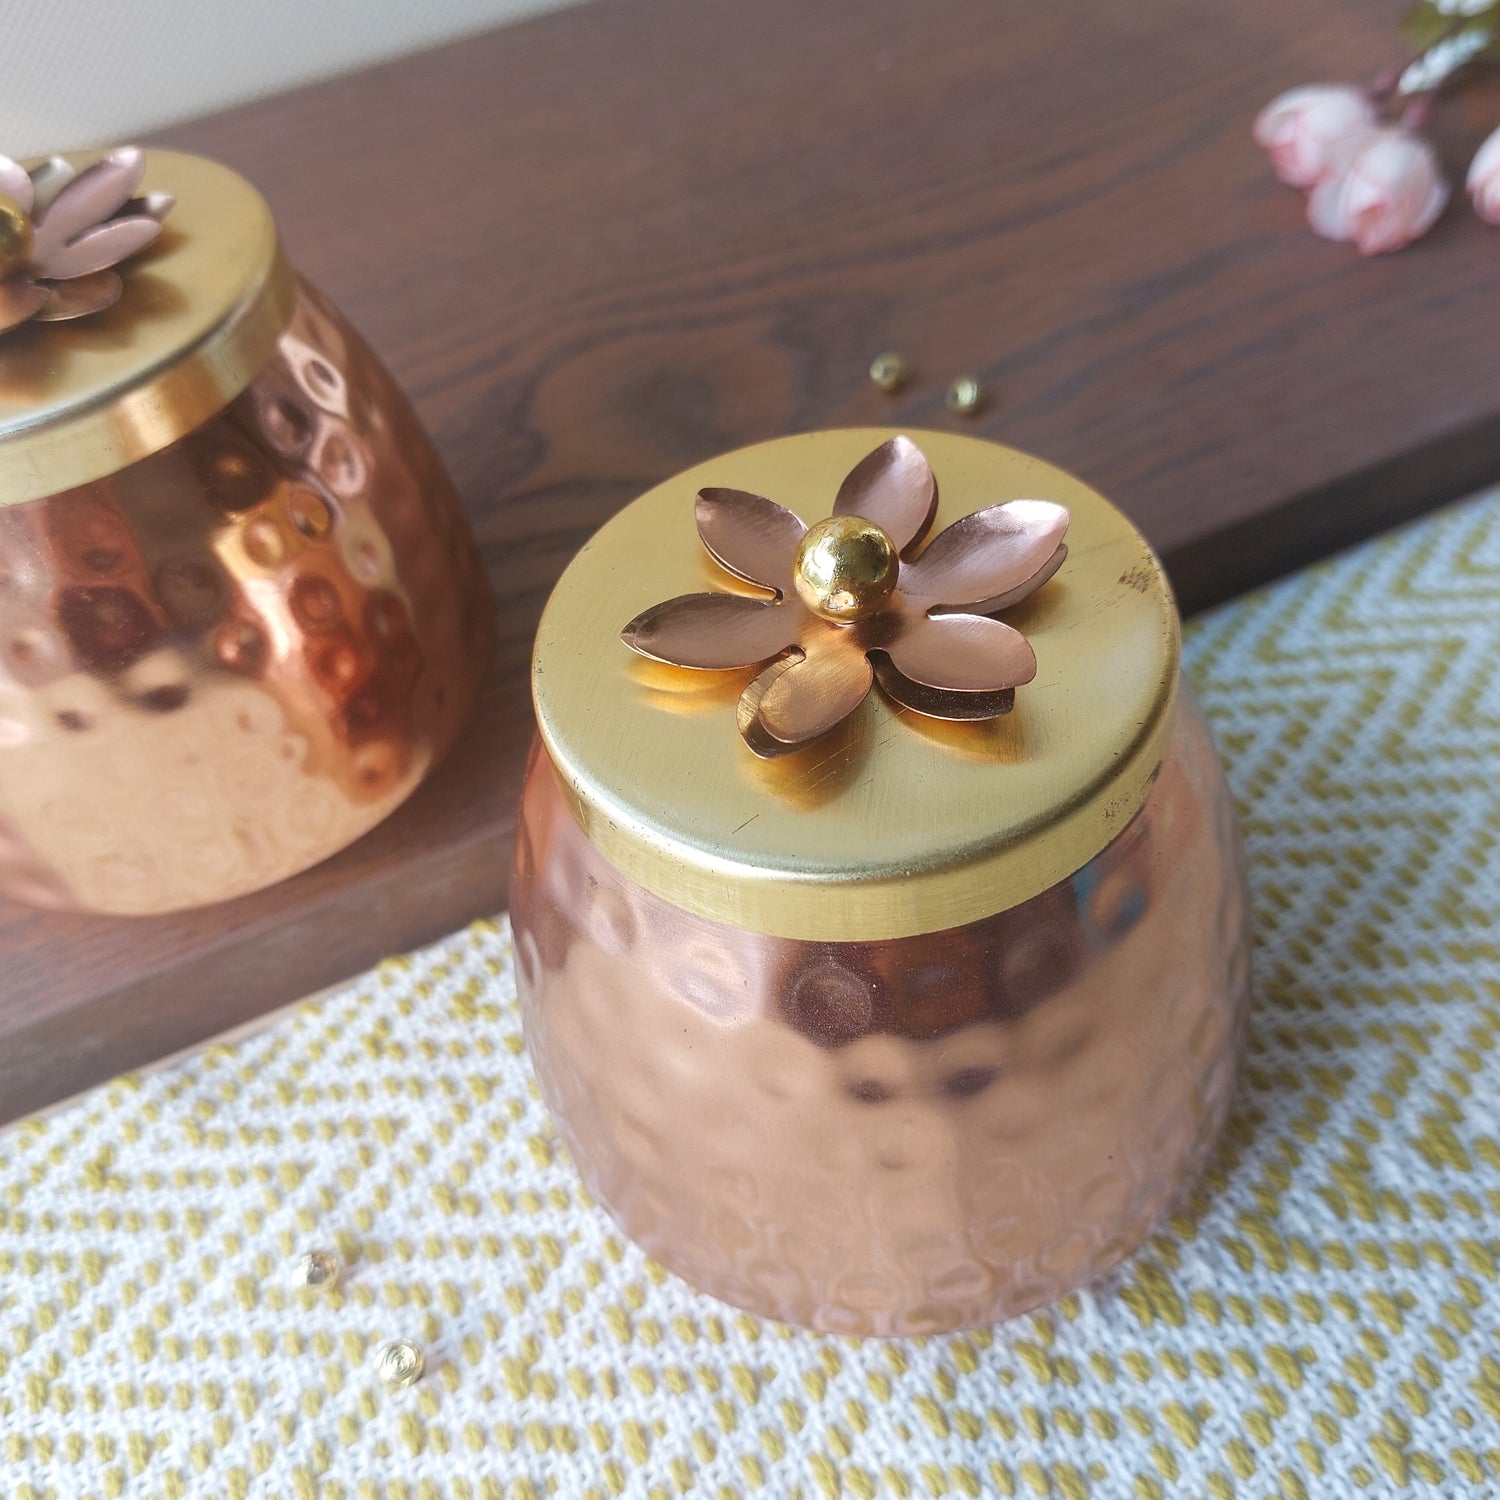 Copper Containers With Lid